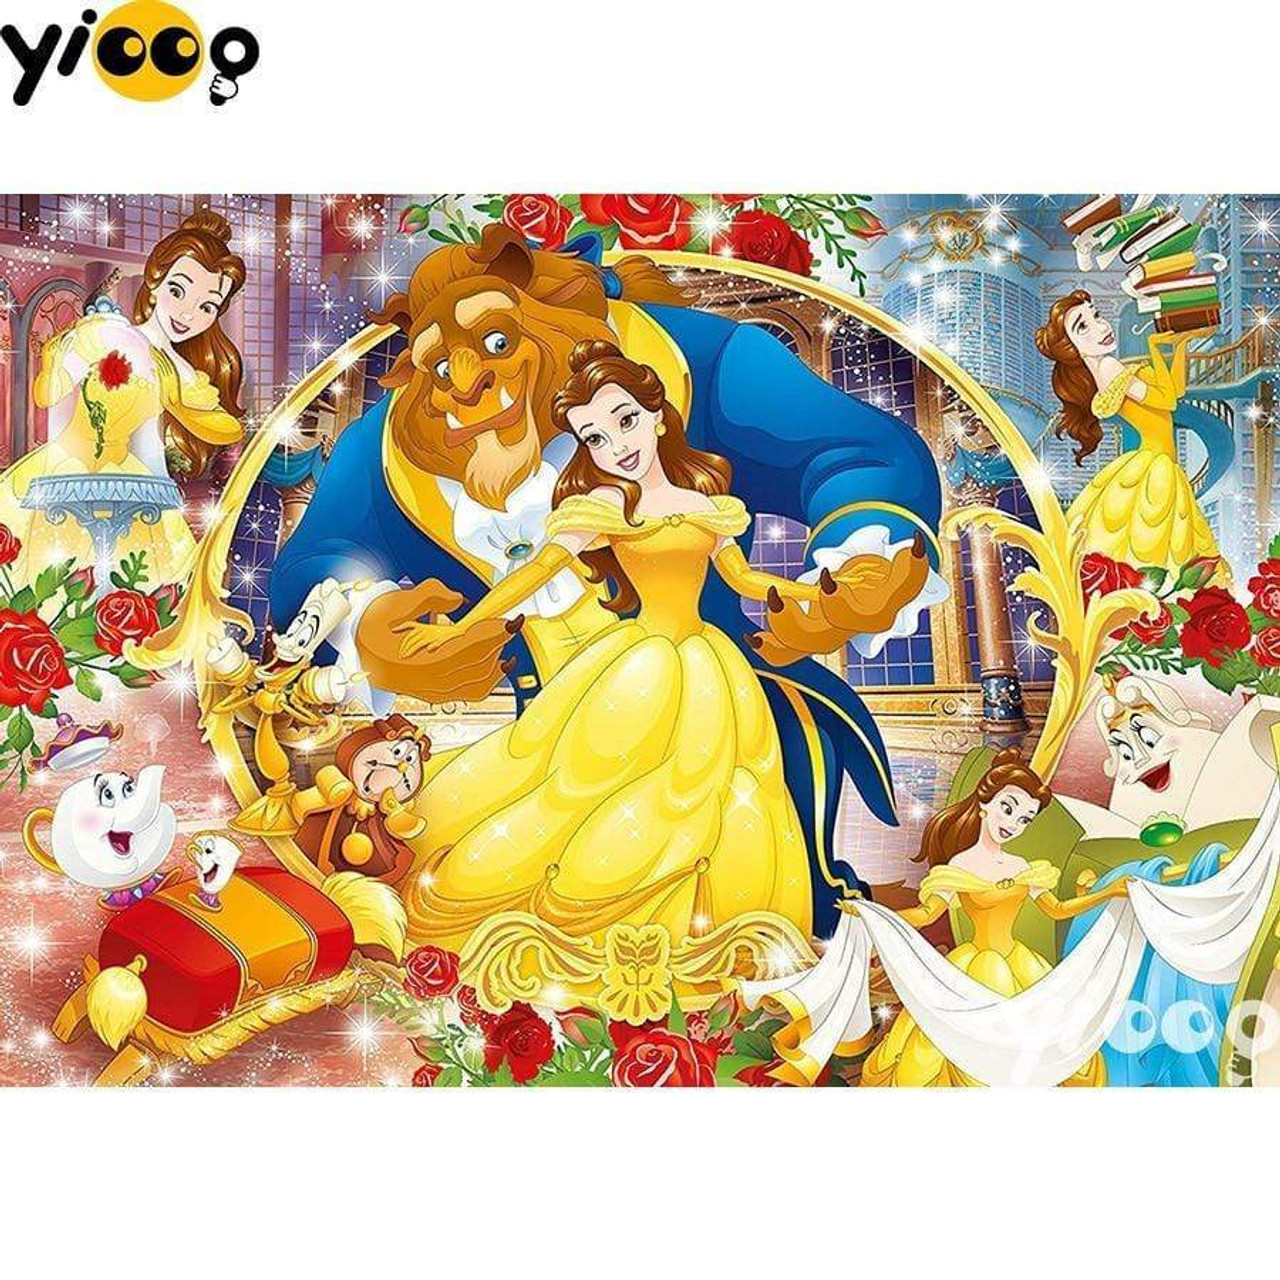 5D Diamond Painting Beauty and the Beast Dancing Collage Kit